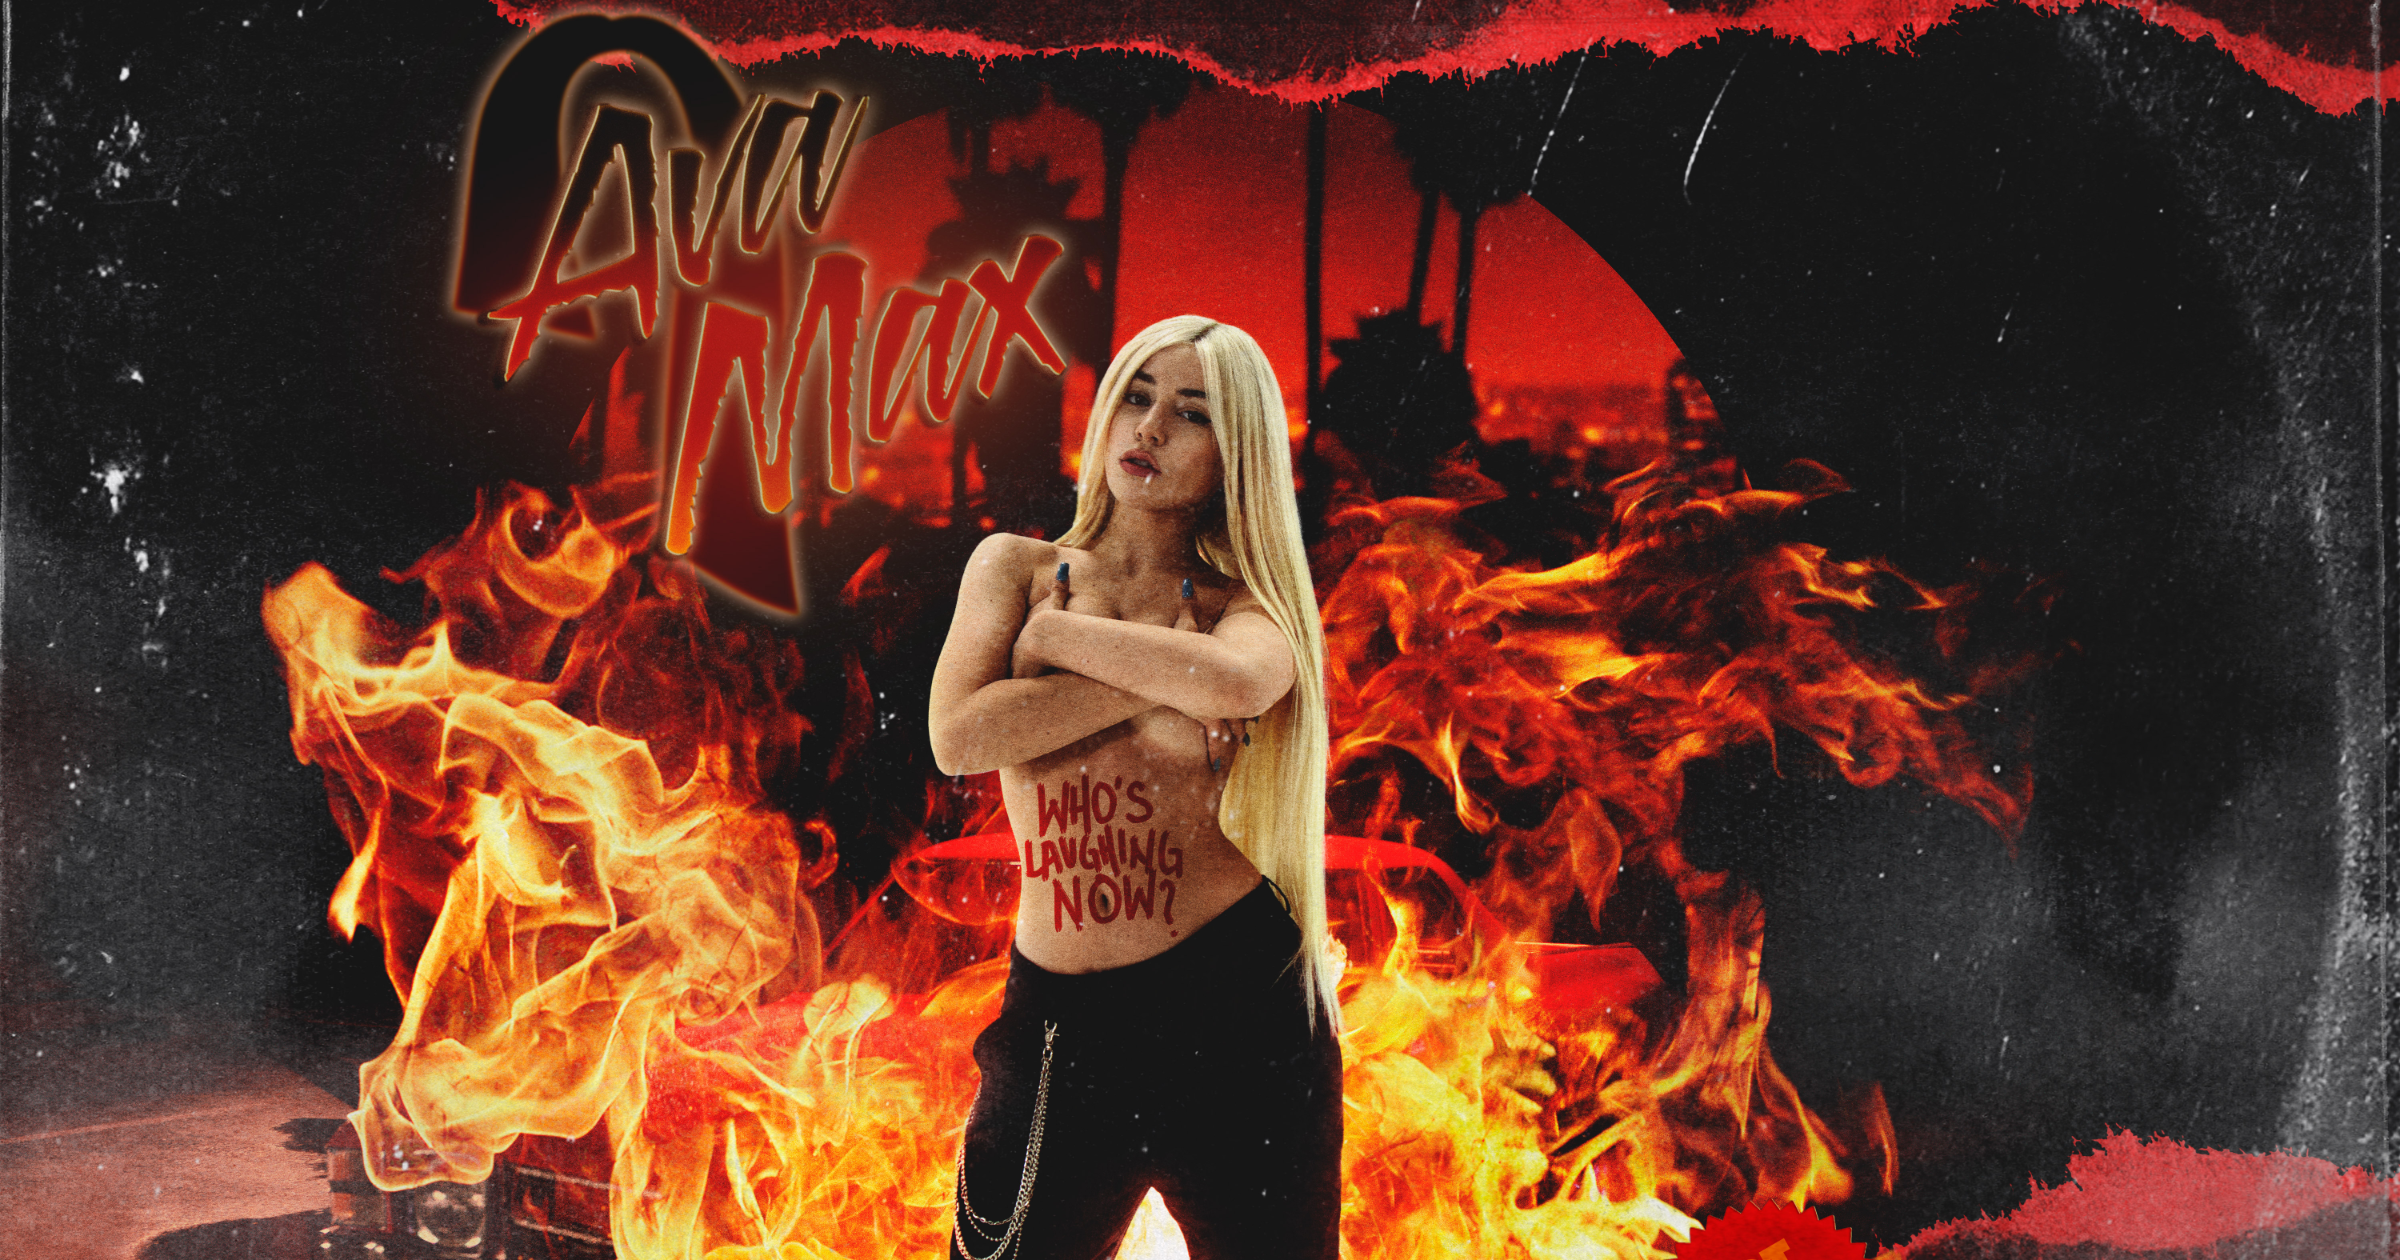 Who’s laughing Now Эйва Макс. Эйва Макс Heaven Hell. Ava Max "Heaven & Hell". Ава Макс who's laughing. Take you to hell ava